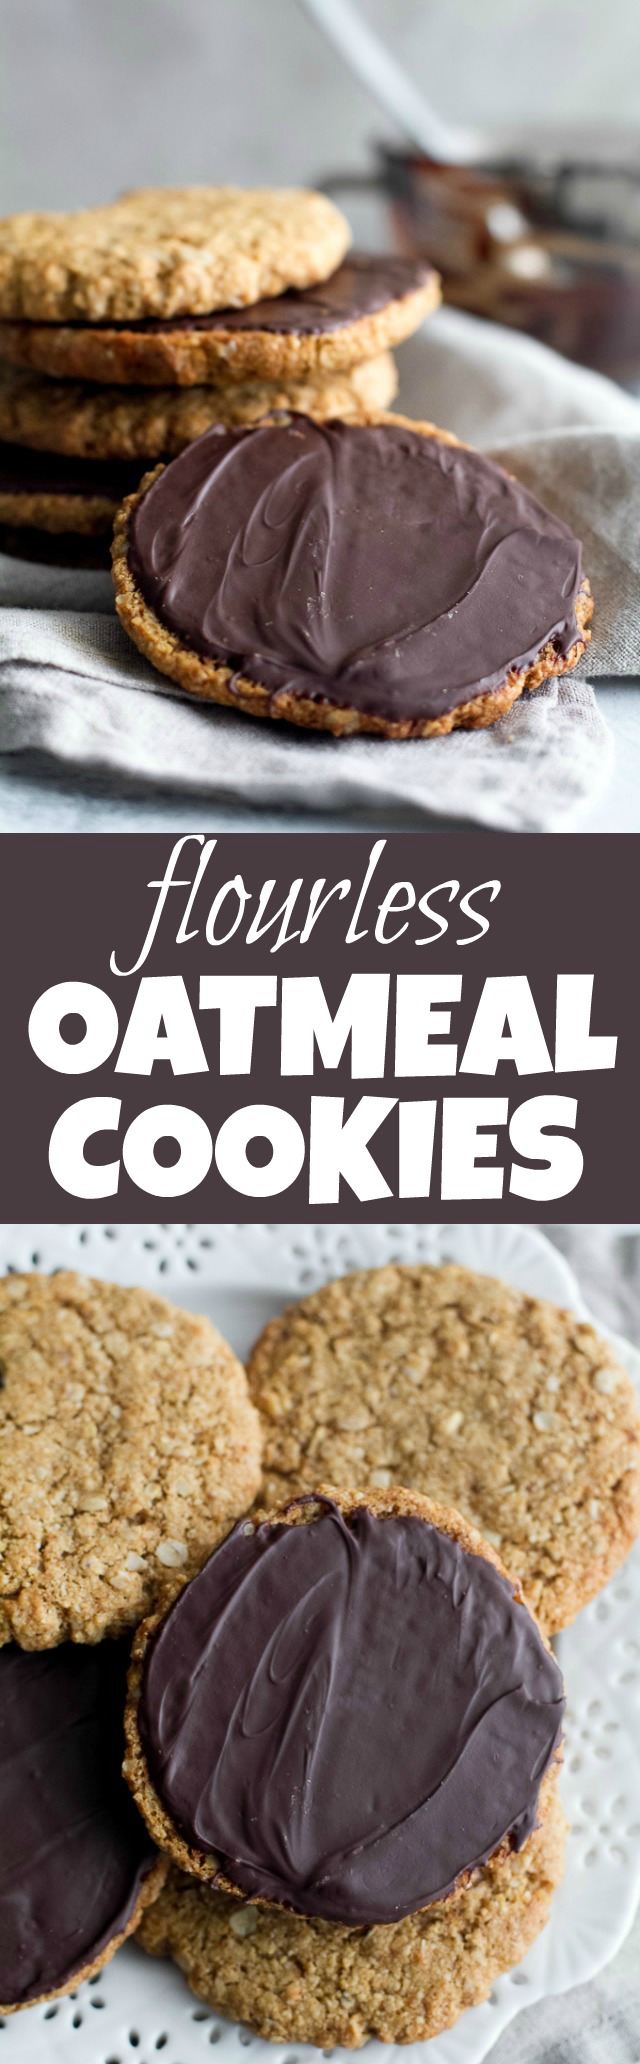 Flourless oatmeal cookies that are soft, chewy, and super easy to make with only one bowl and 7 ingredients | runningwithspoons.com